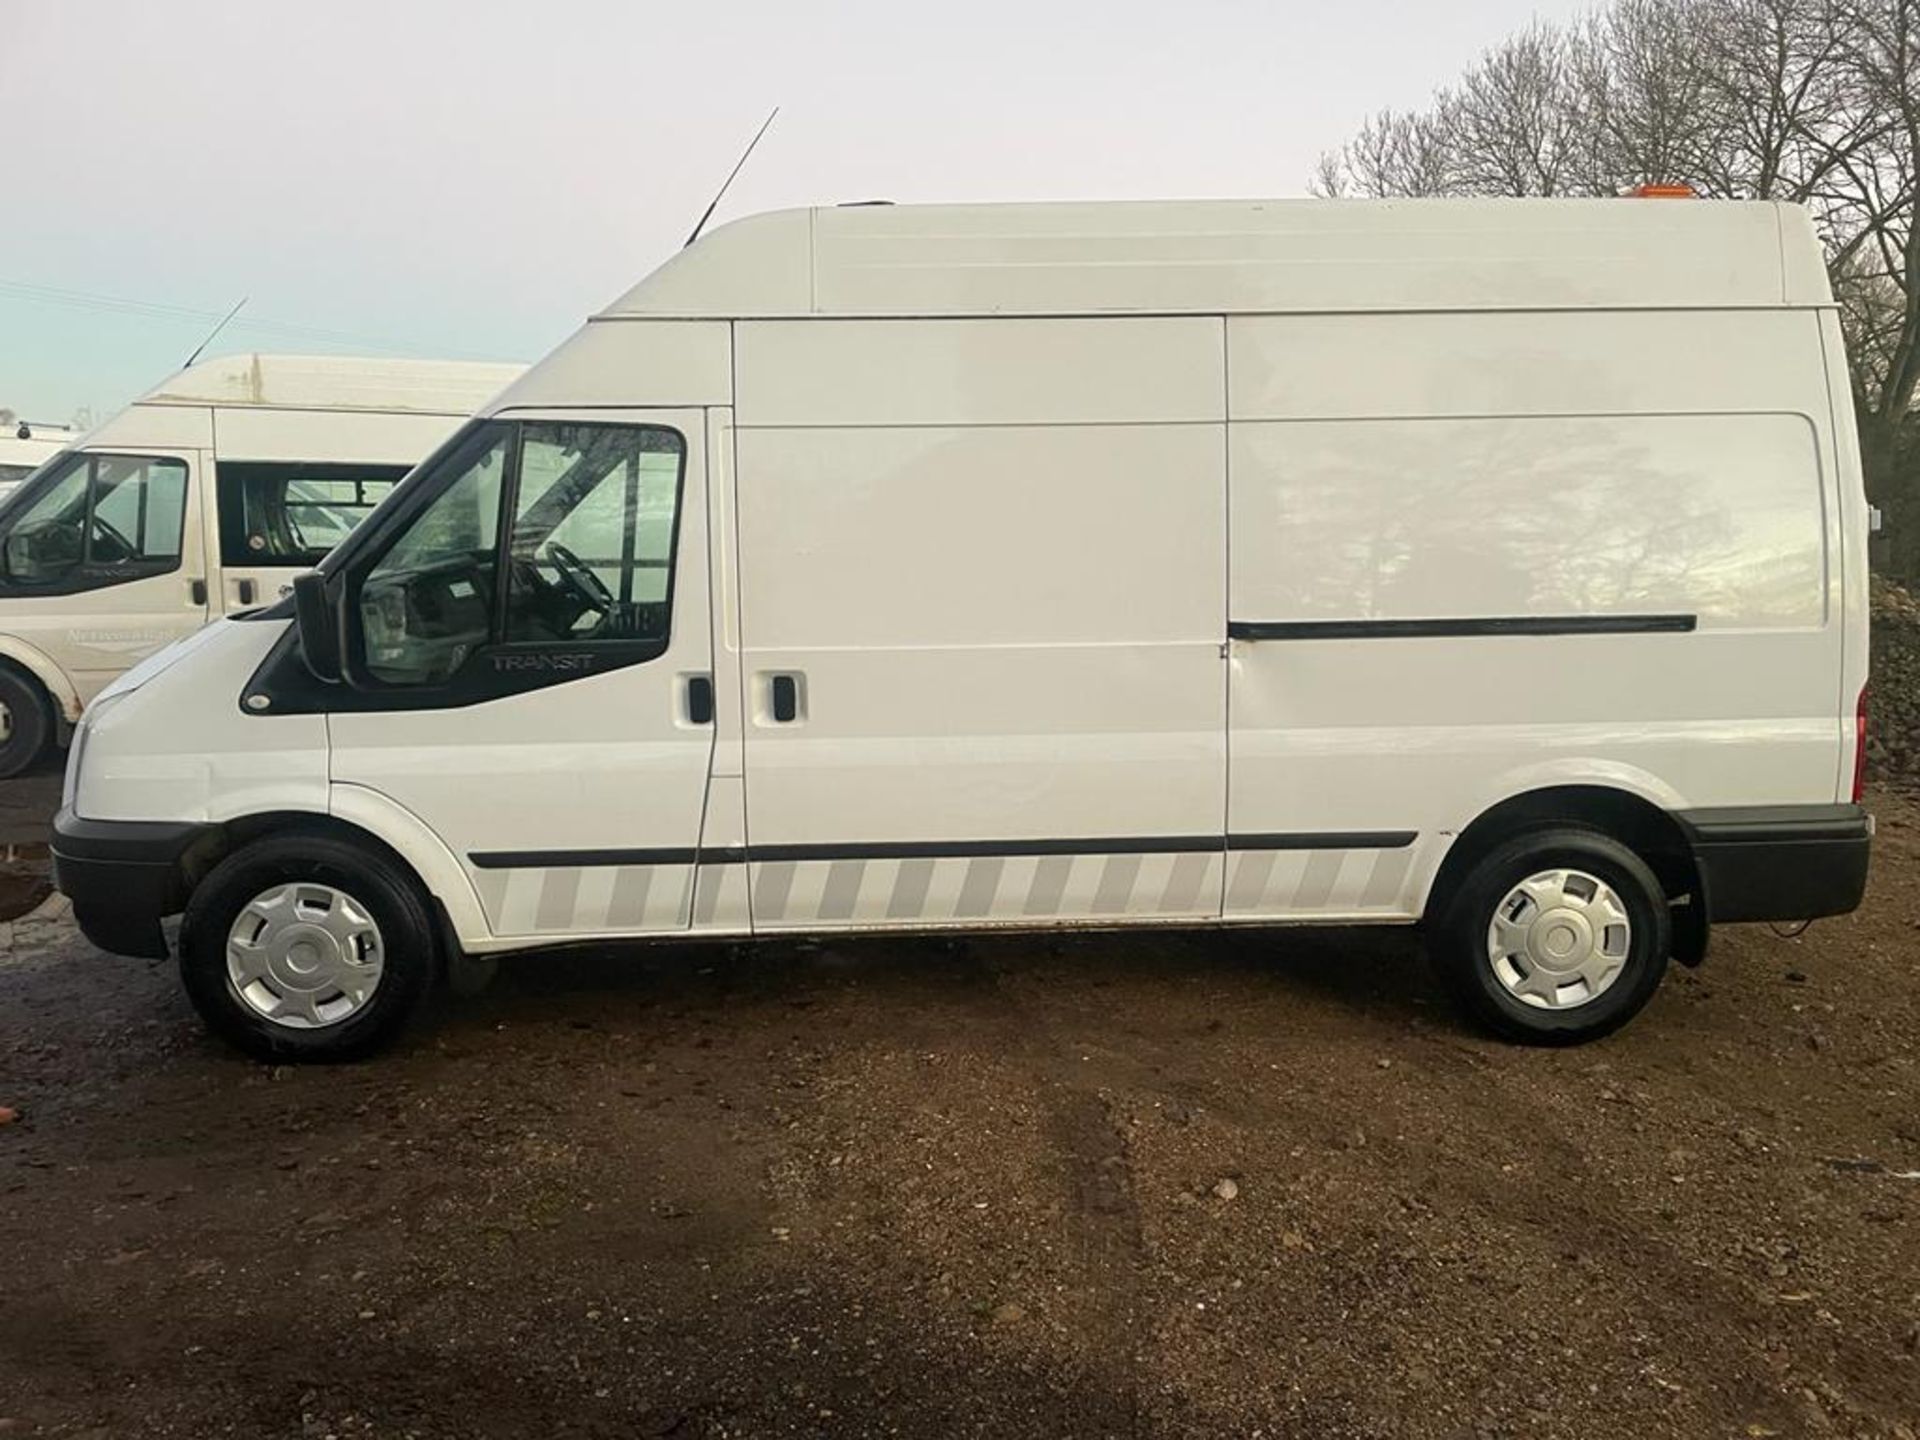 2011/61 FORD TRANSIT 125 T350 TREND FWD LWB HIGH TOP PANEL VAN, 92K MILES, REAR HIAB CRANE FITTED - Image 4 of 12